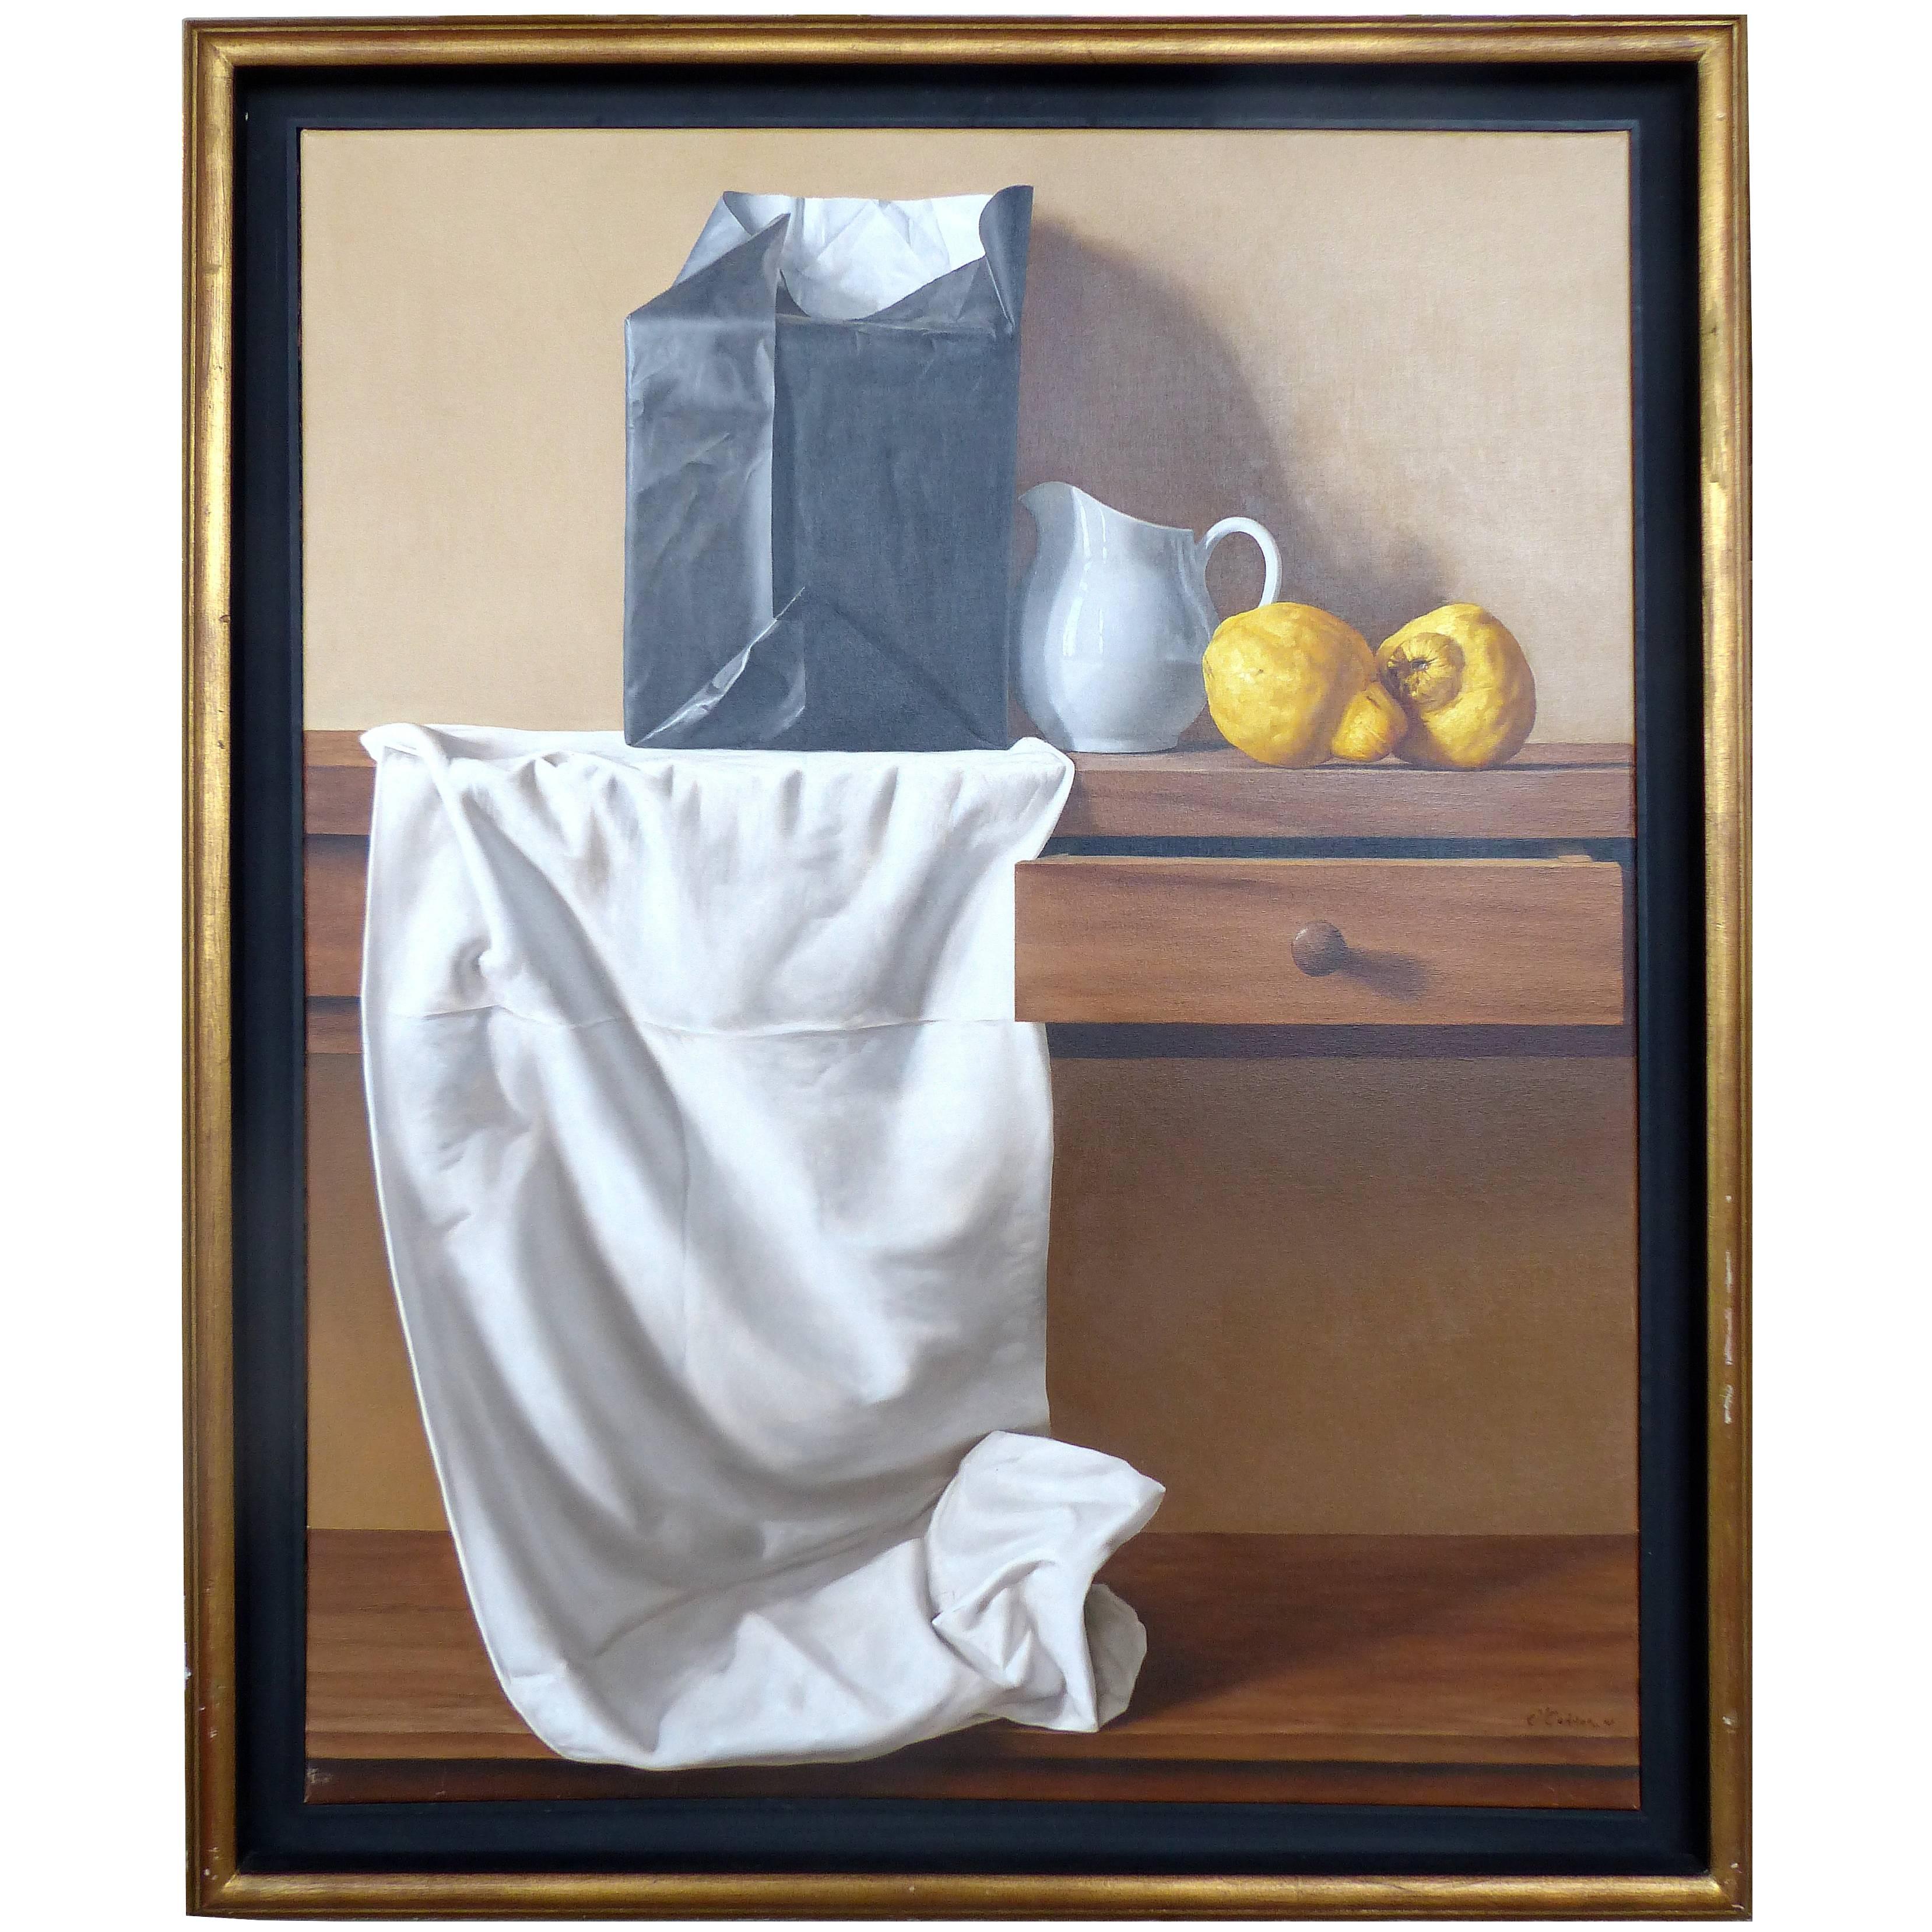 Contemporary "Black Package" Oil on Canvas by Argentine Artist Fernando O'Connor